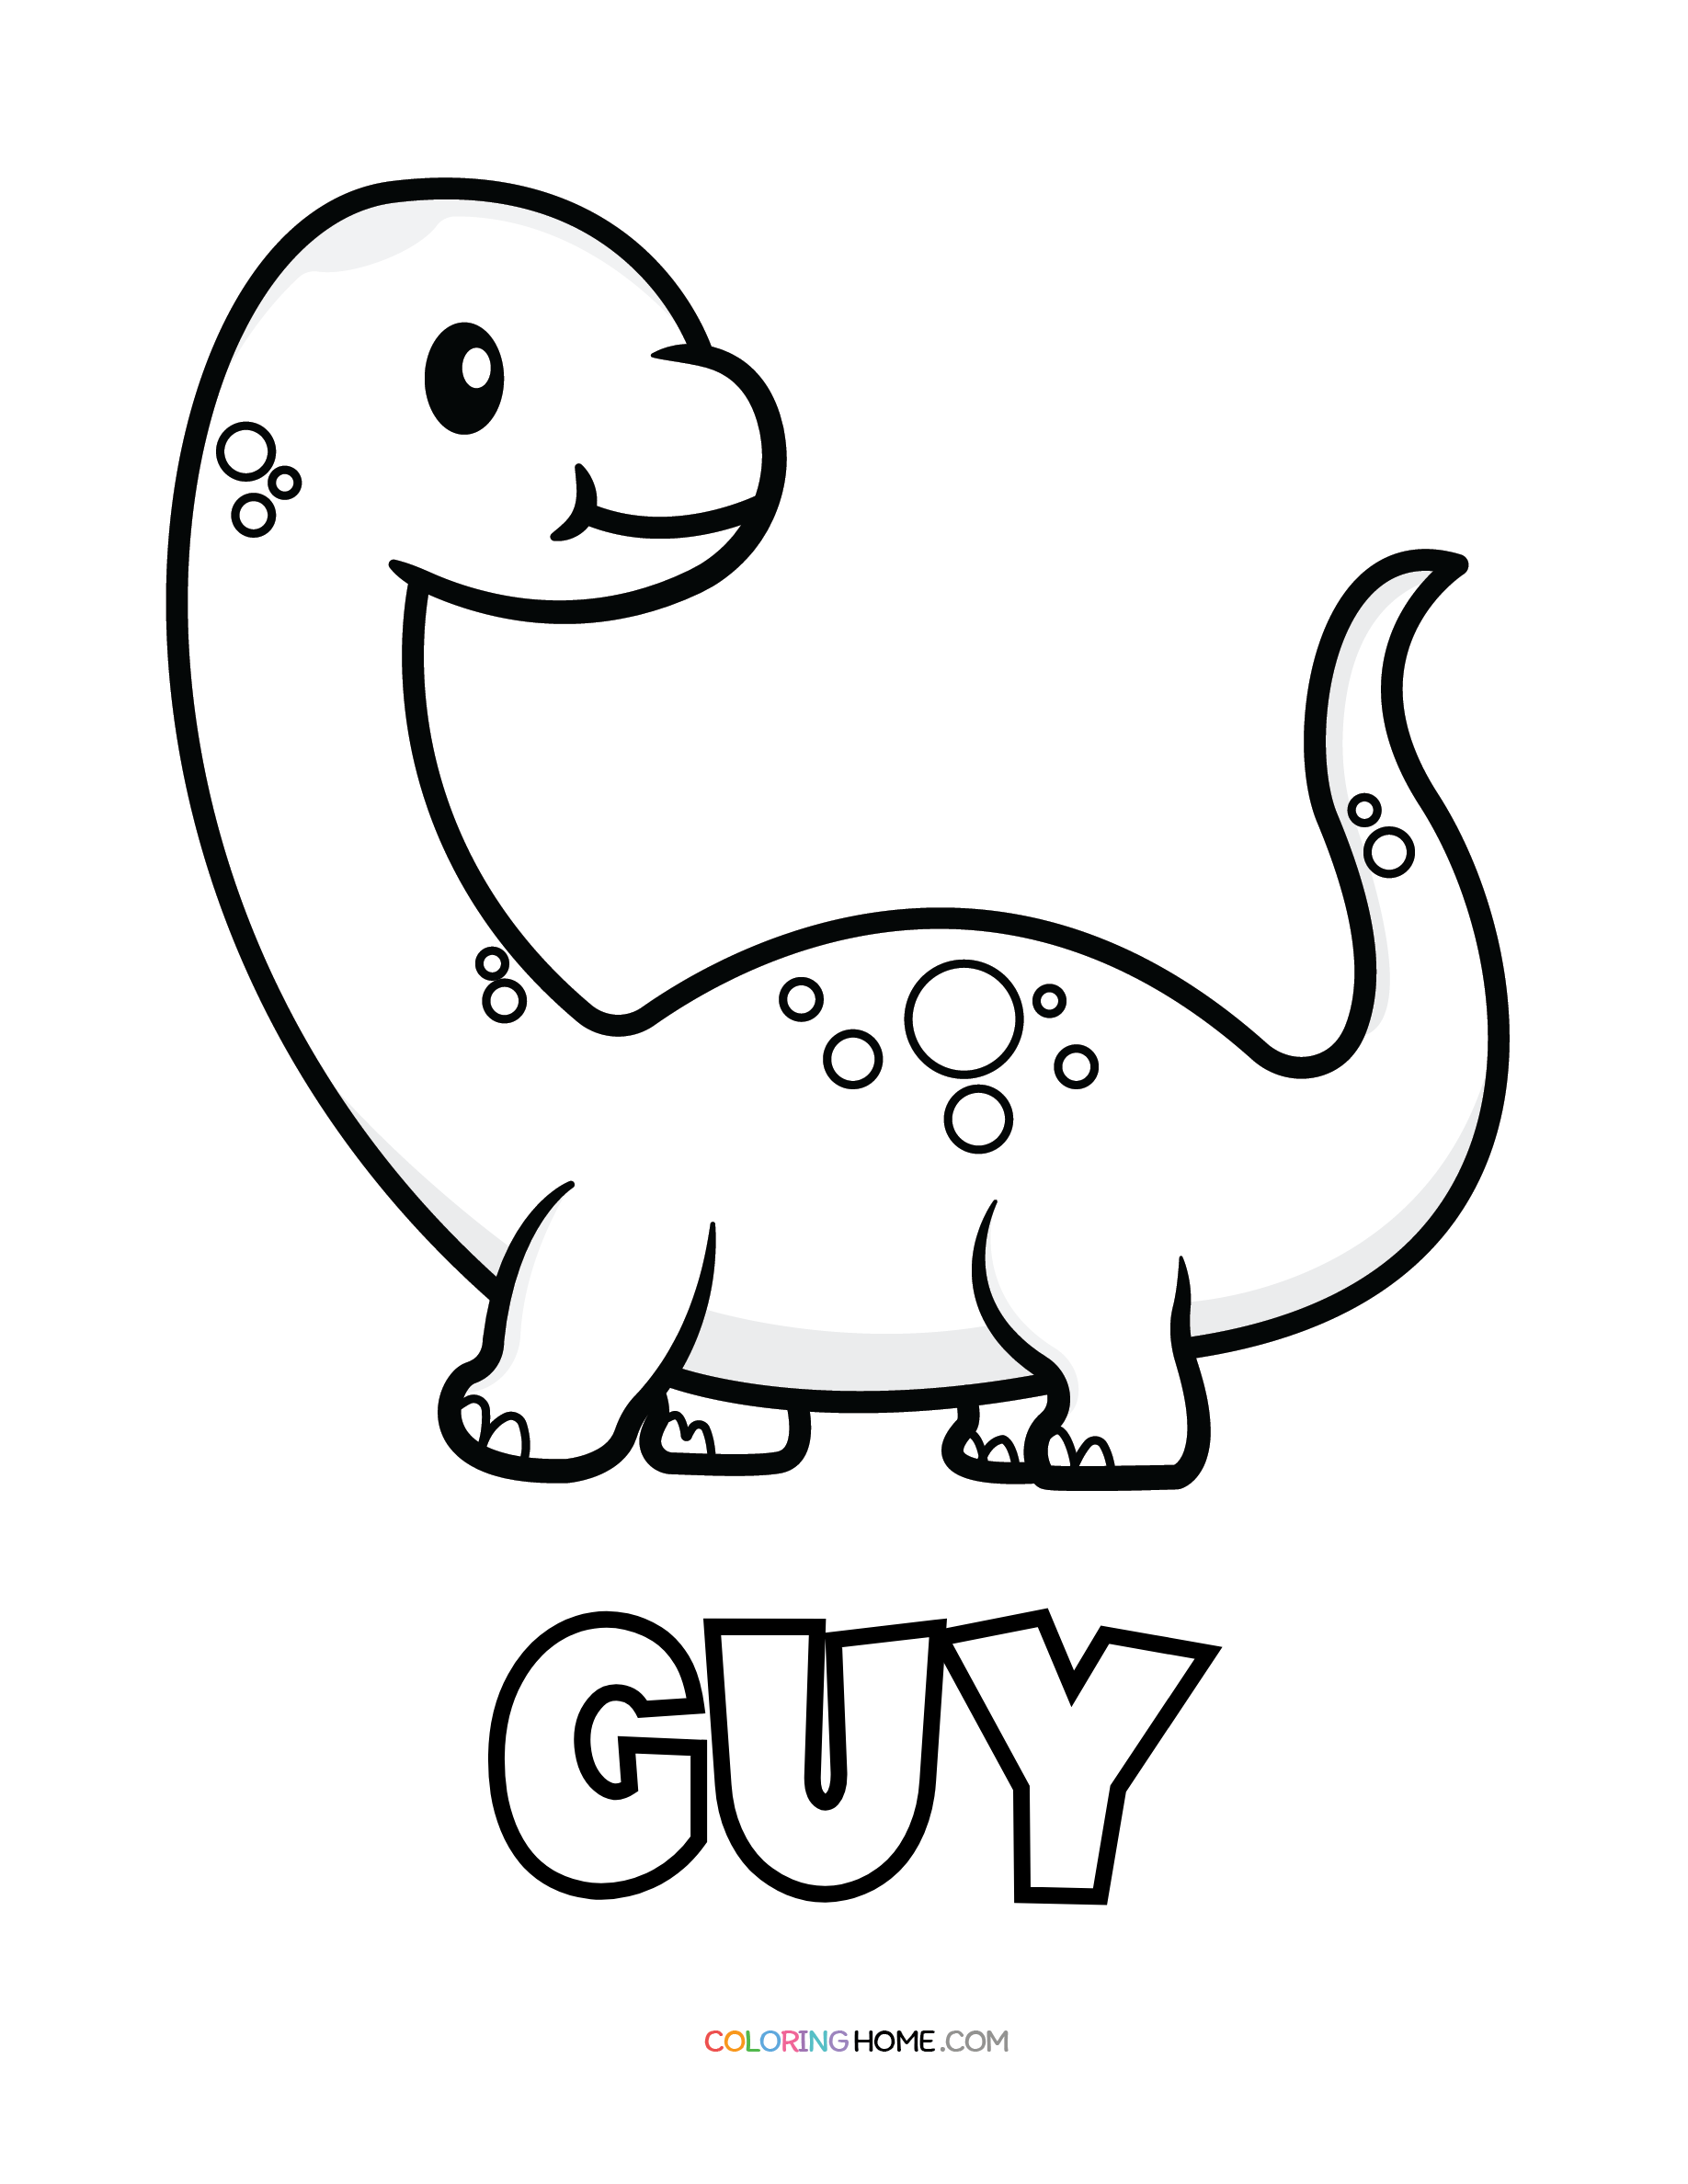 Guy dinosaur coloring page